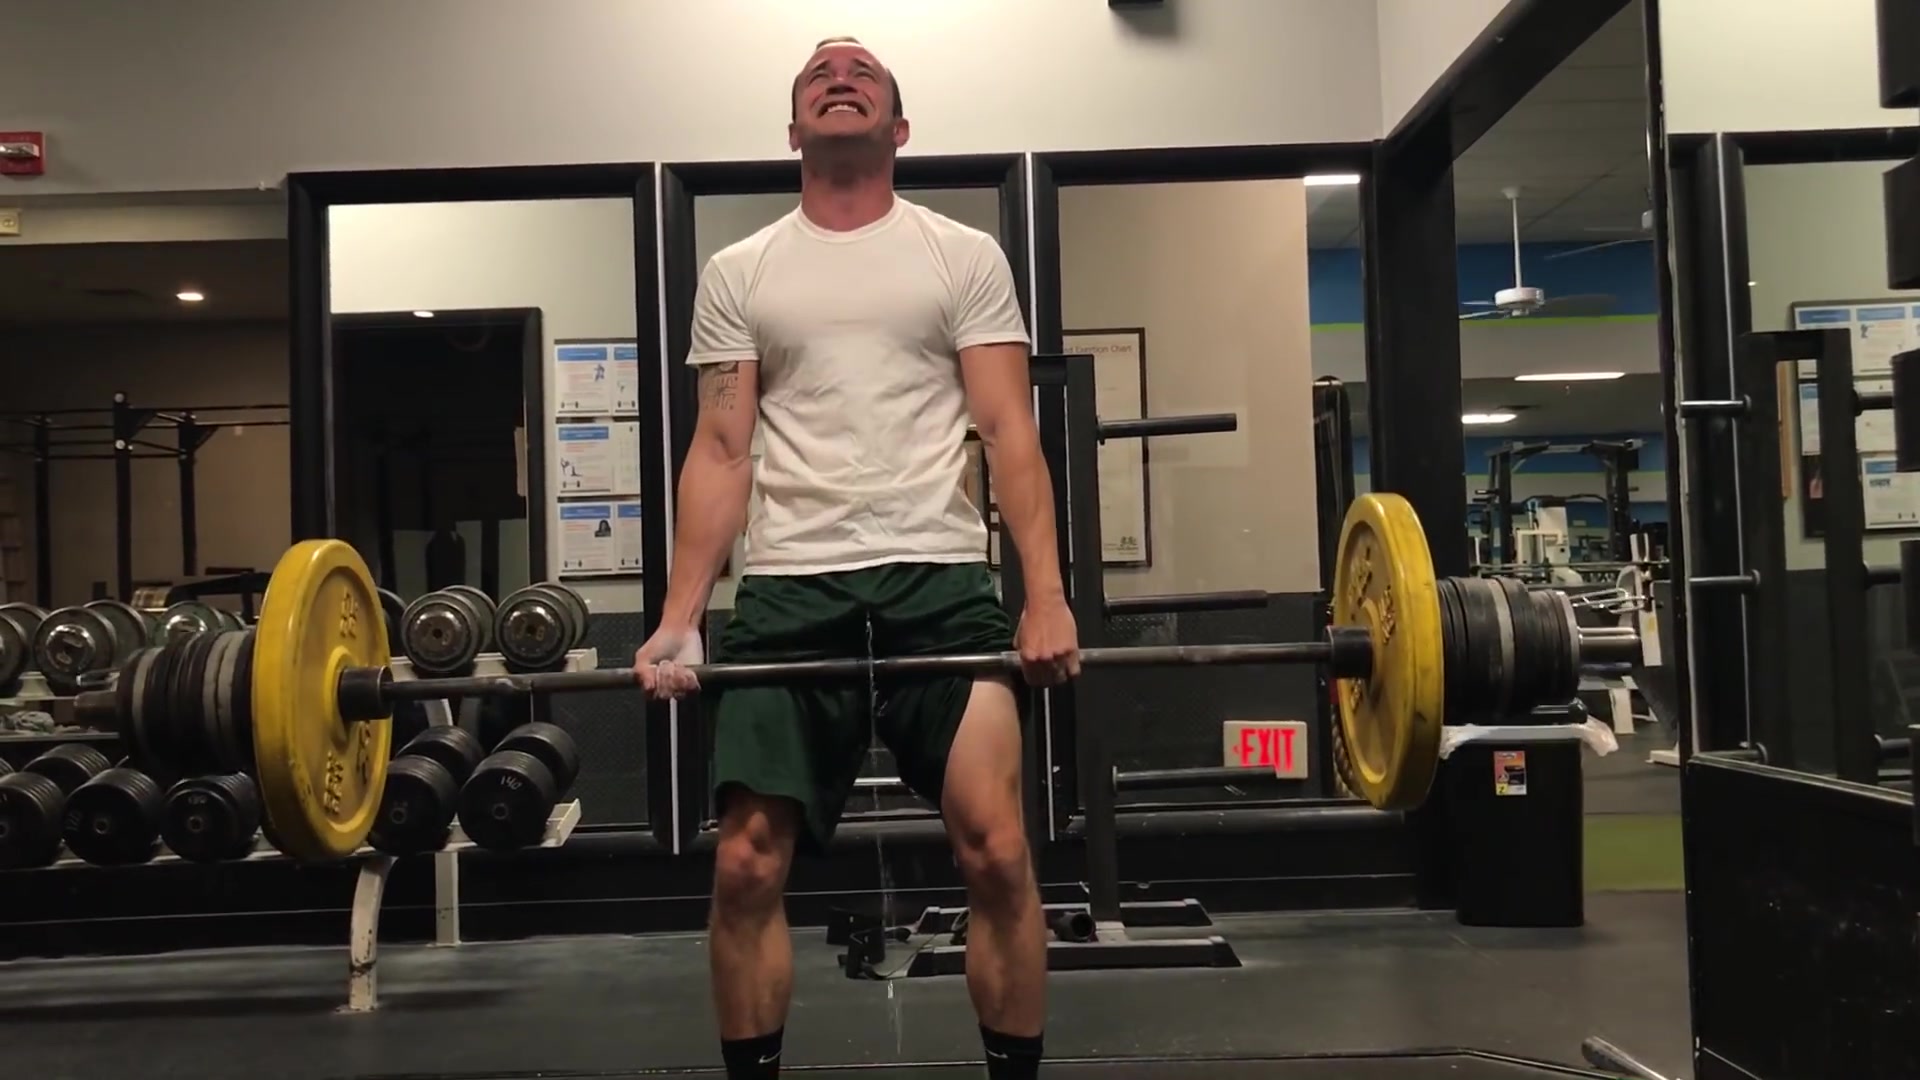 FRIEND PEEING WHILE LIFTING WEIGHTS